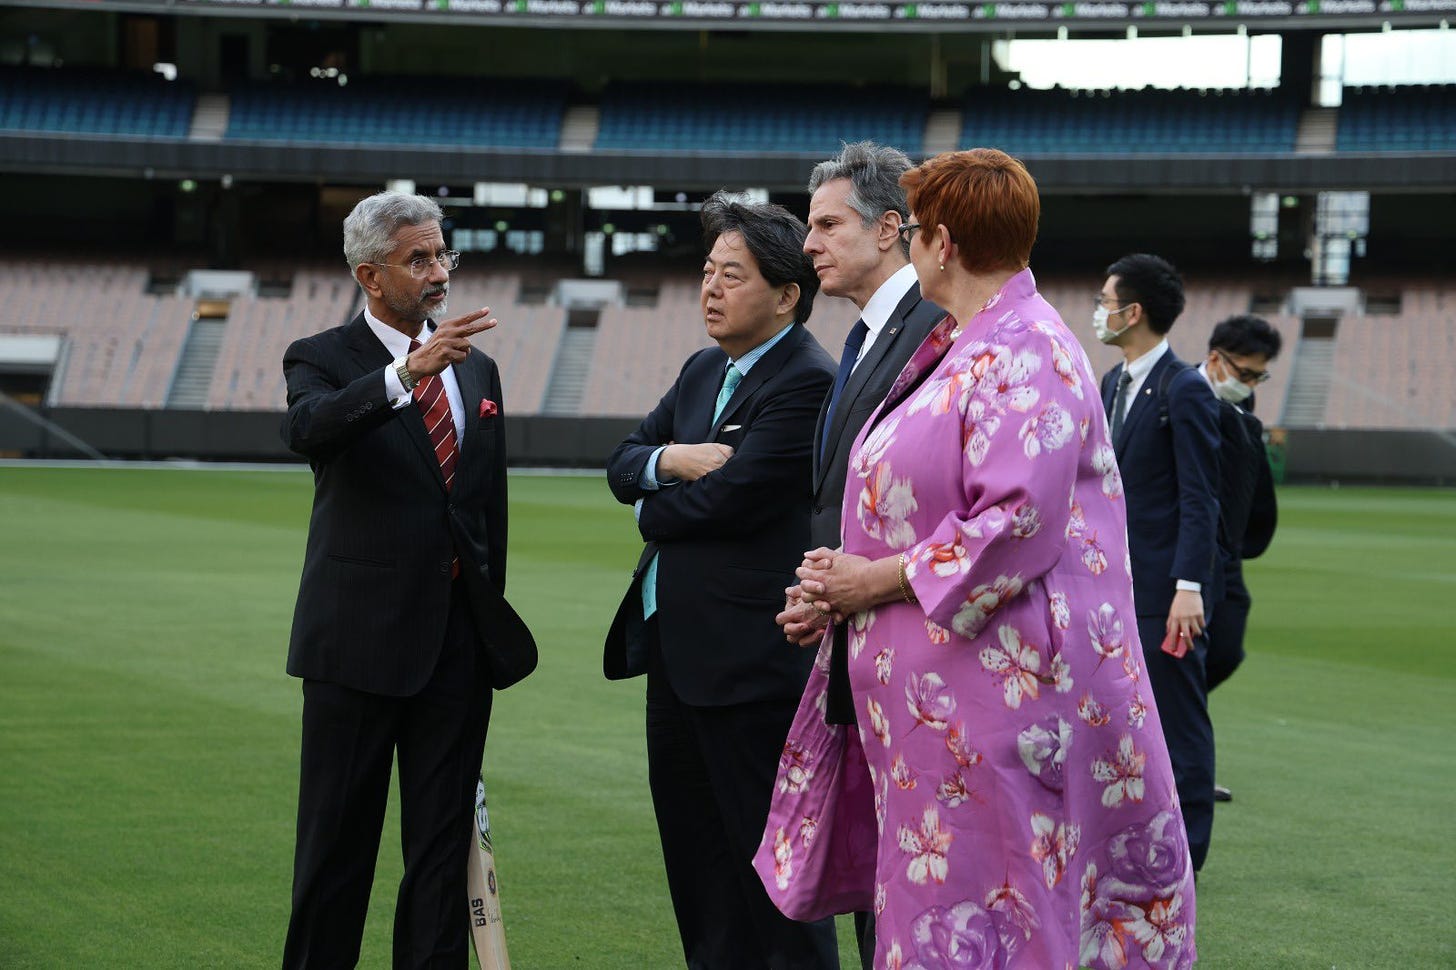 Foreign ministers of Australia, India, Japan and the United States at the Melbourne Cricket Ground on February 11, 2022. (Image: Twitter/@DrSJaishankar)